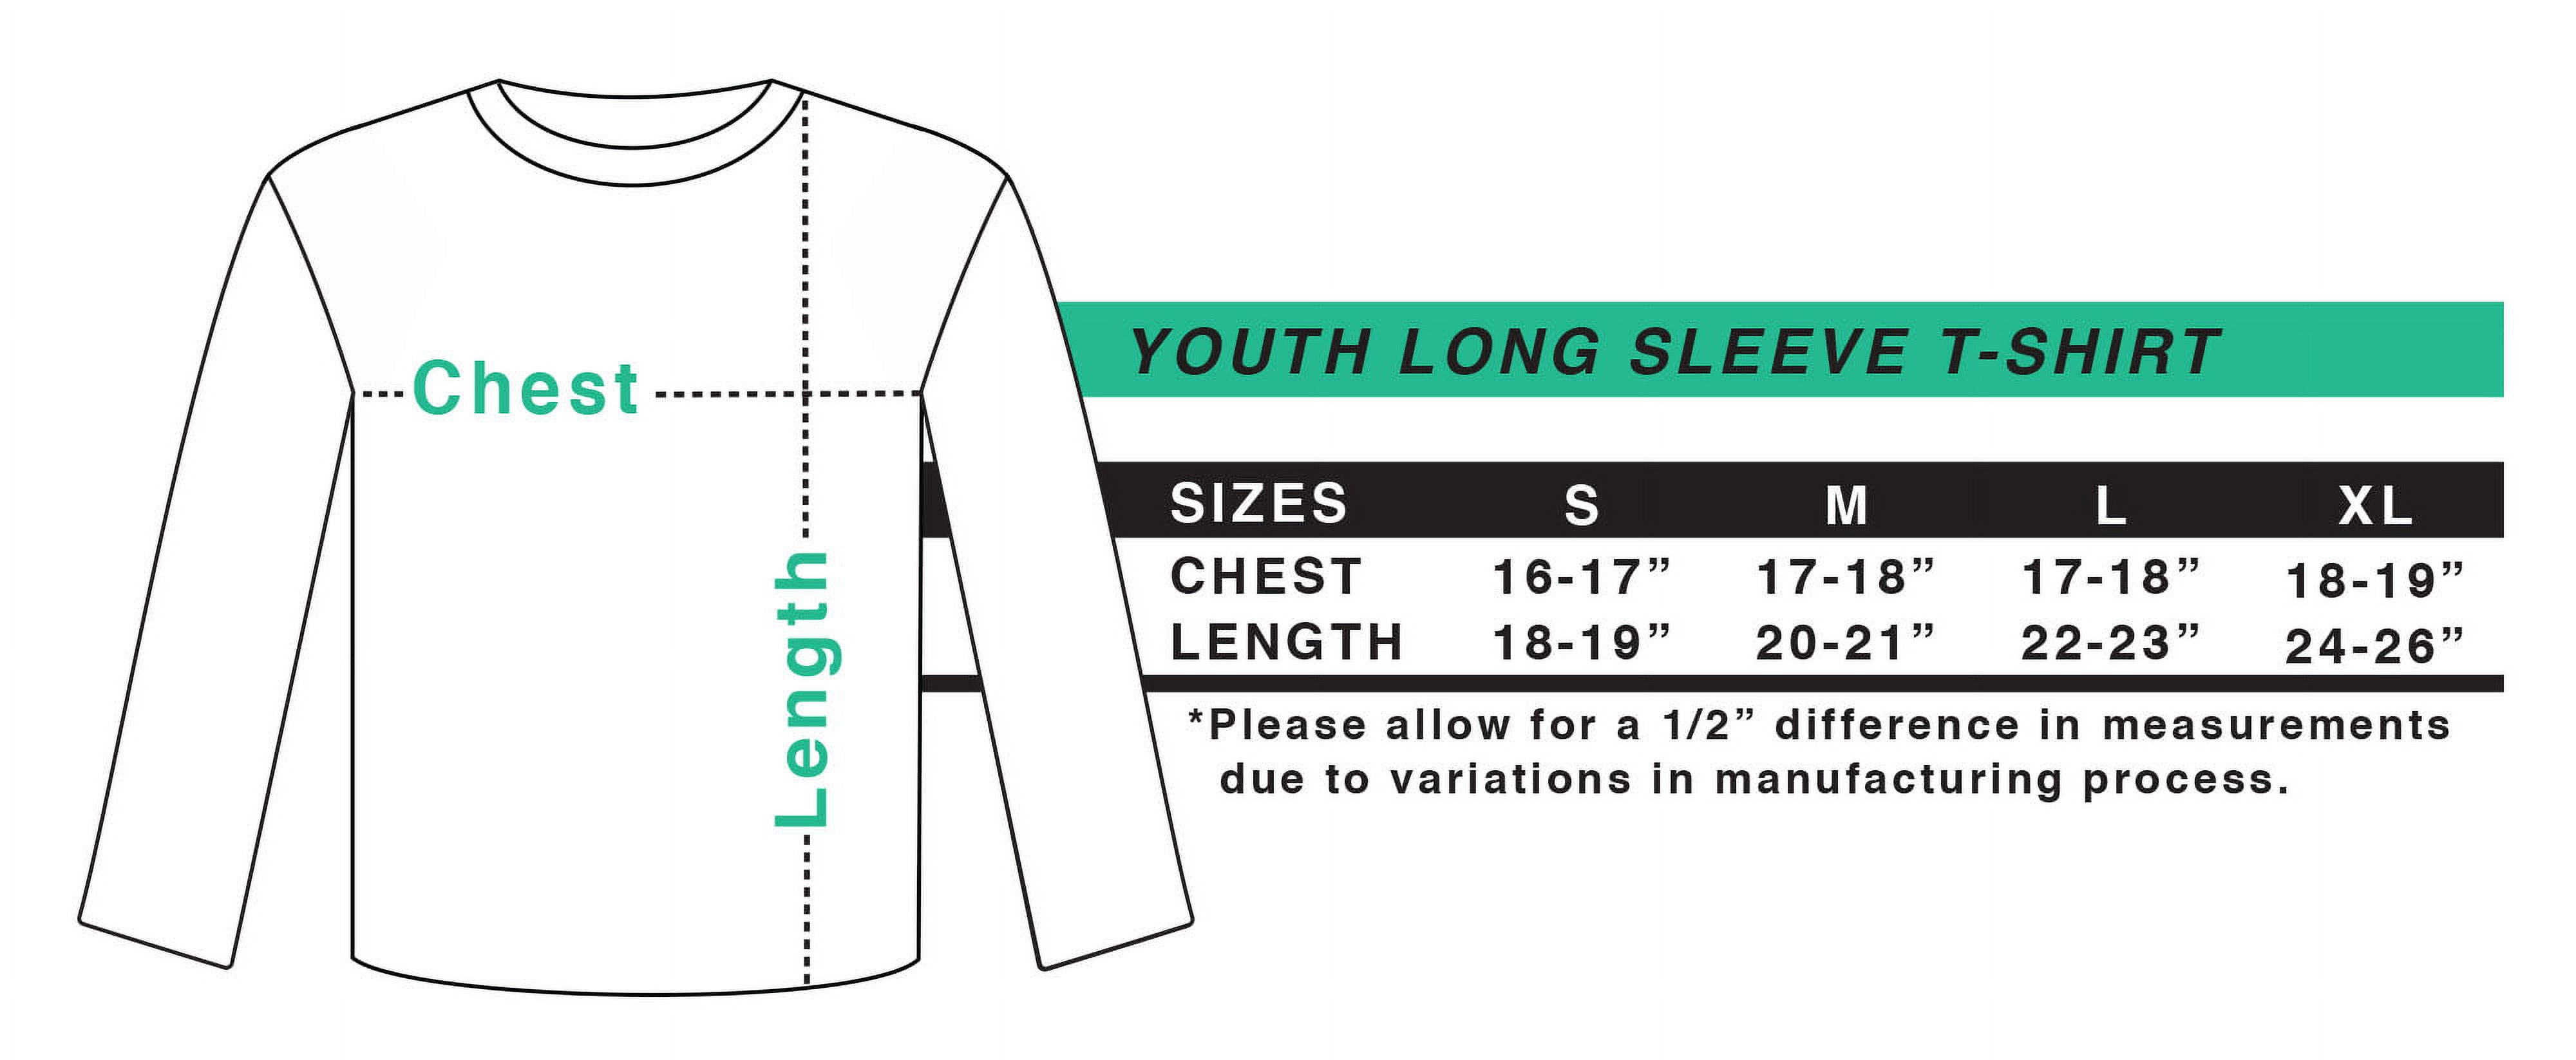 Inktastic Spring Gnome 2021 Long Sleeve Youth T-Shirt - image 2 of 4